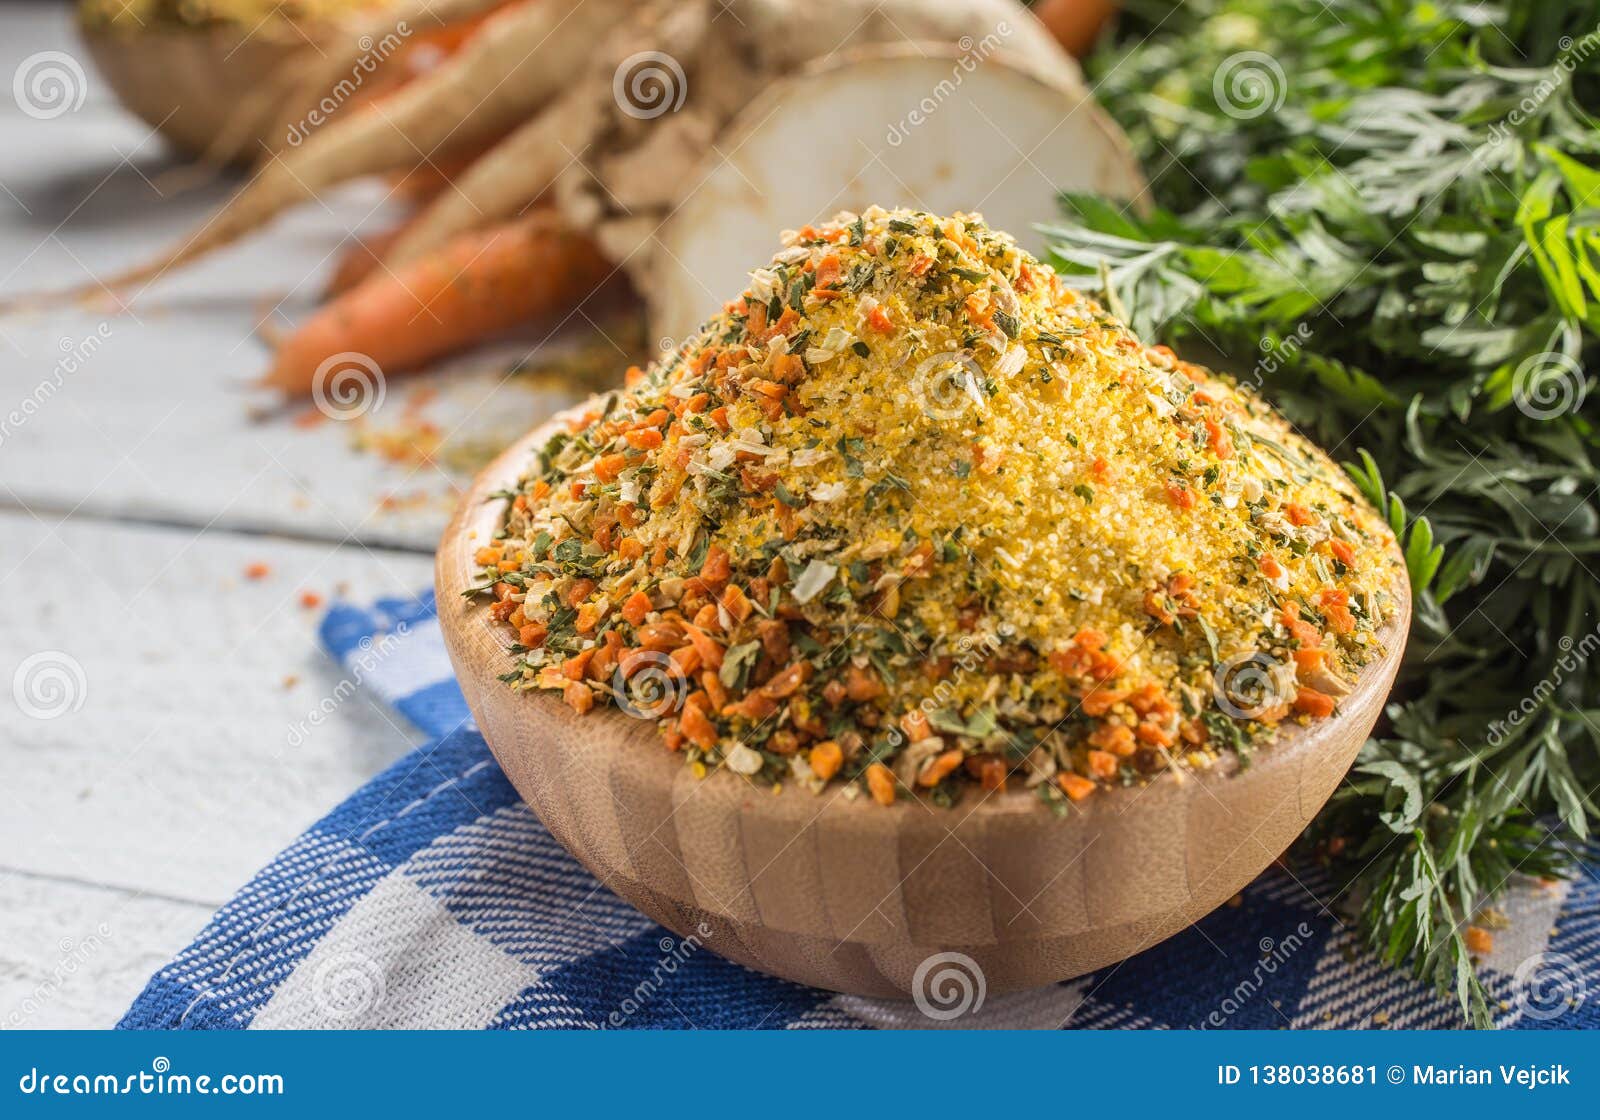 Seasoning spices condiment vegeta from dehydrated carrot parsley